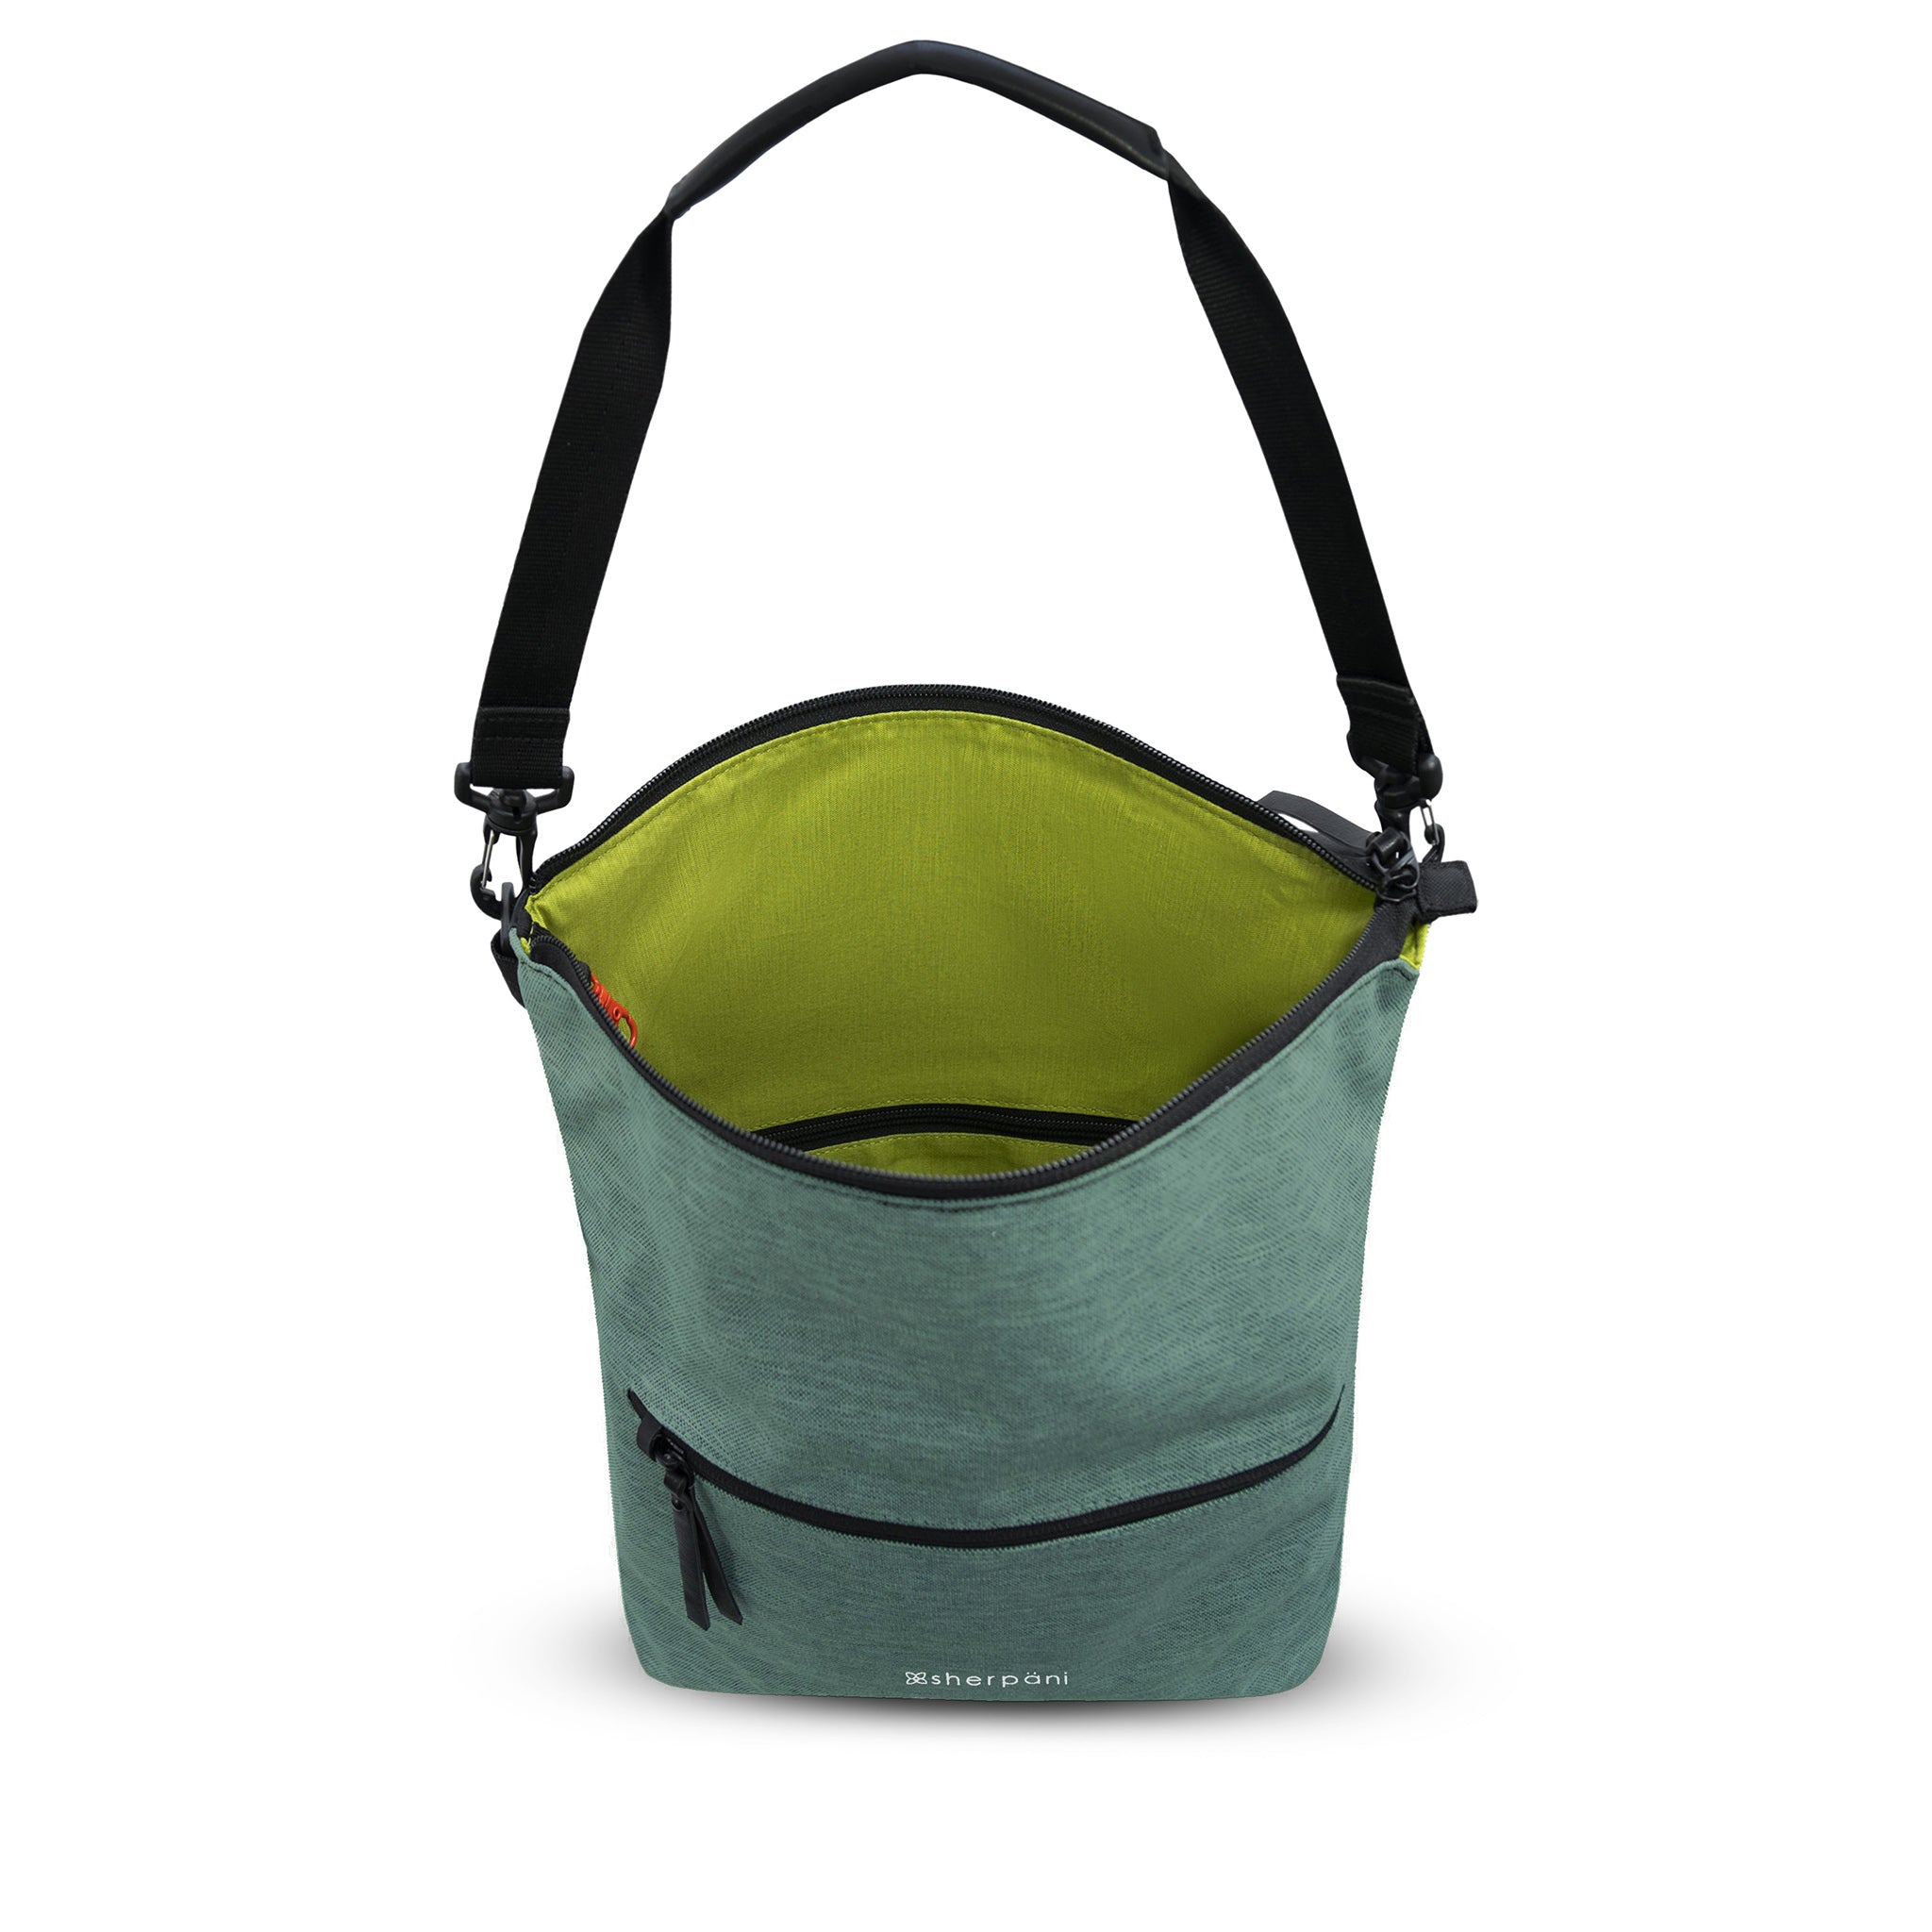 Top view of Sherpani’s Anti-Theft bag, the Vale AT in Teal. The main zipper compartment is open to reveal a lime green interior with an internal zipper pocket. There is a red carabiner that acts as the zipper lock to the main compartment. The front features an external compartment with a locking zipper. A detachable tote strap is attached to the top of the bag. 